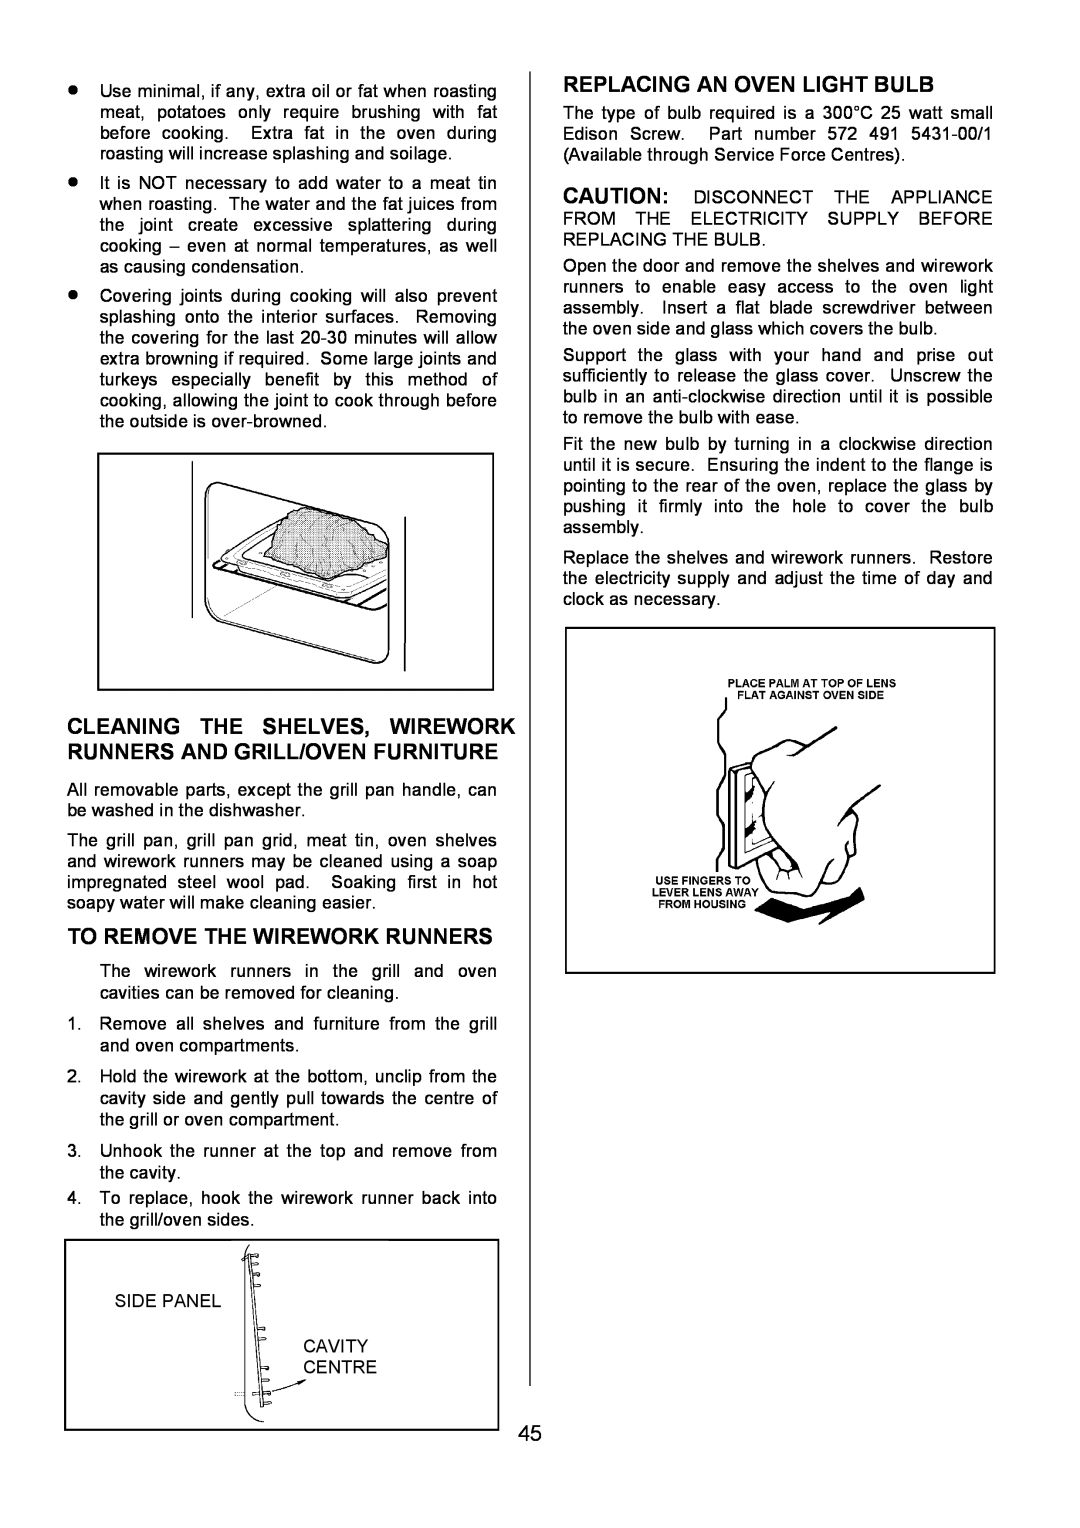 Electrolux EOD6390 manual To Remove The Wirework Runners, Replacing An Oven Light Bulb 